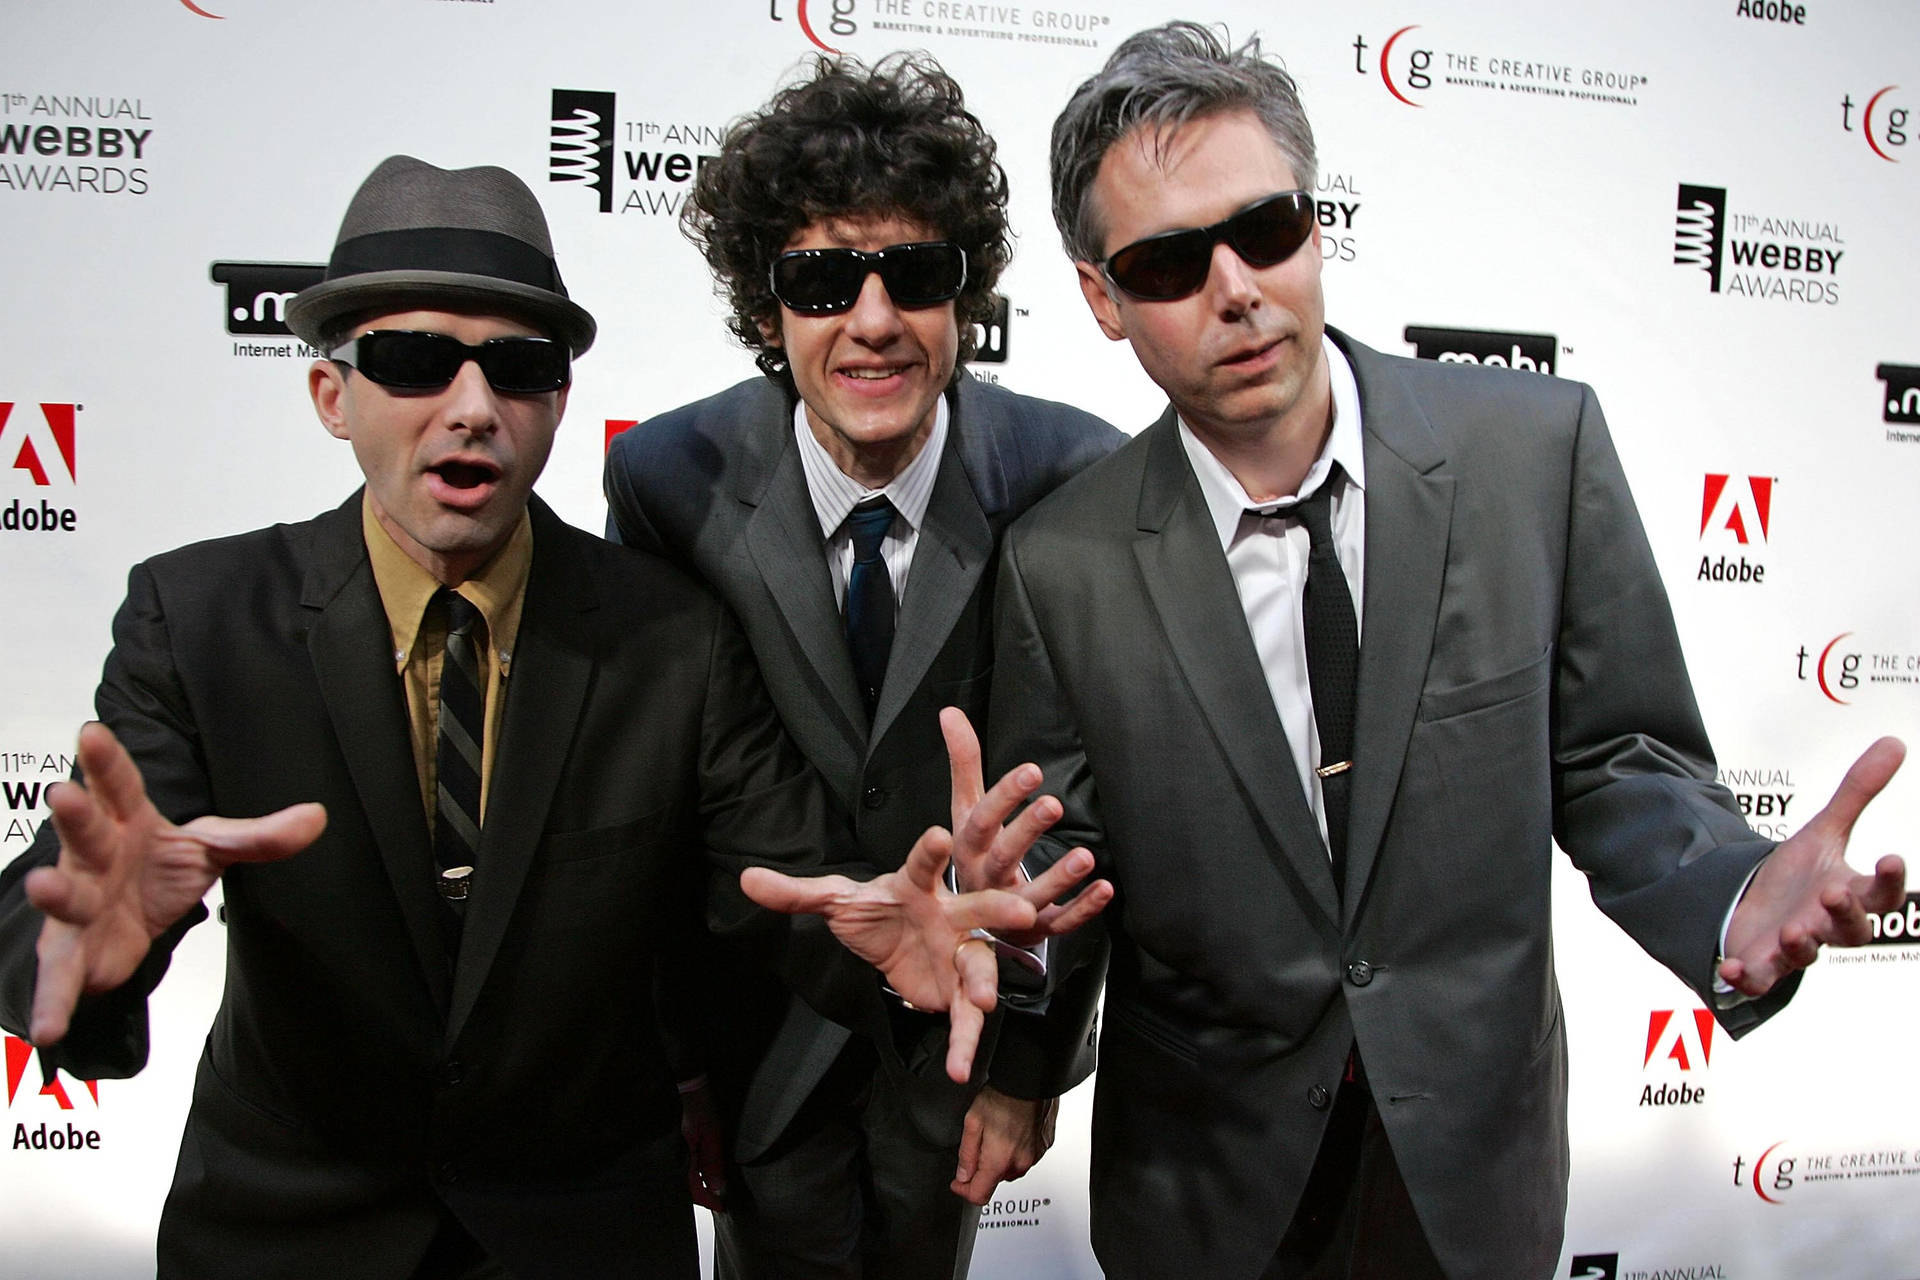 Beastie Boys 11th Annual Webby Awards Picture